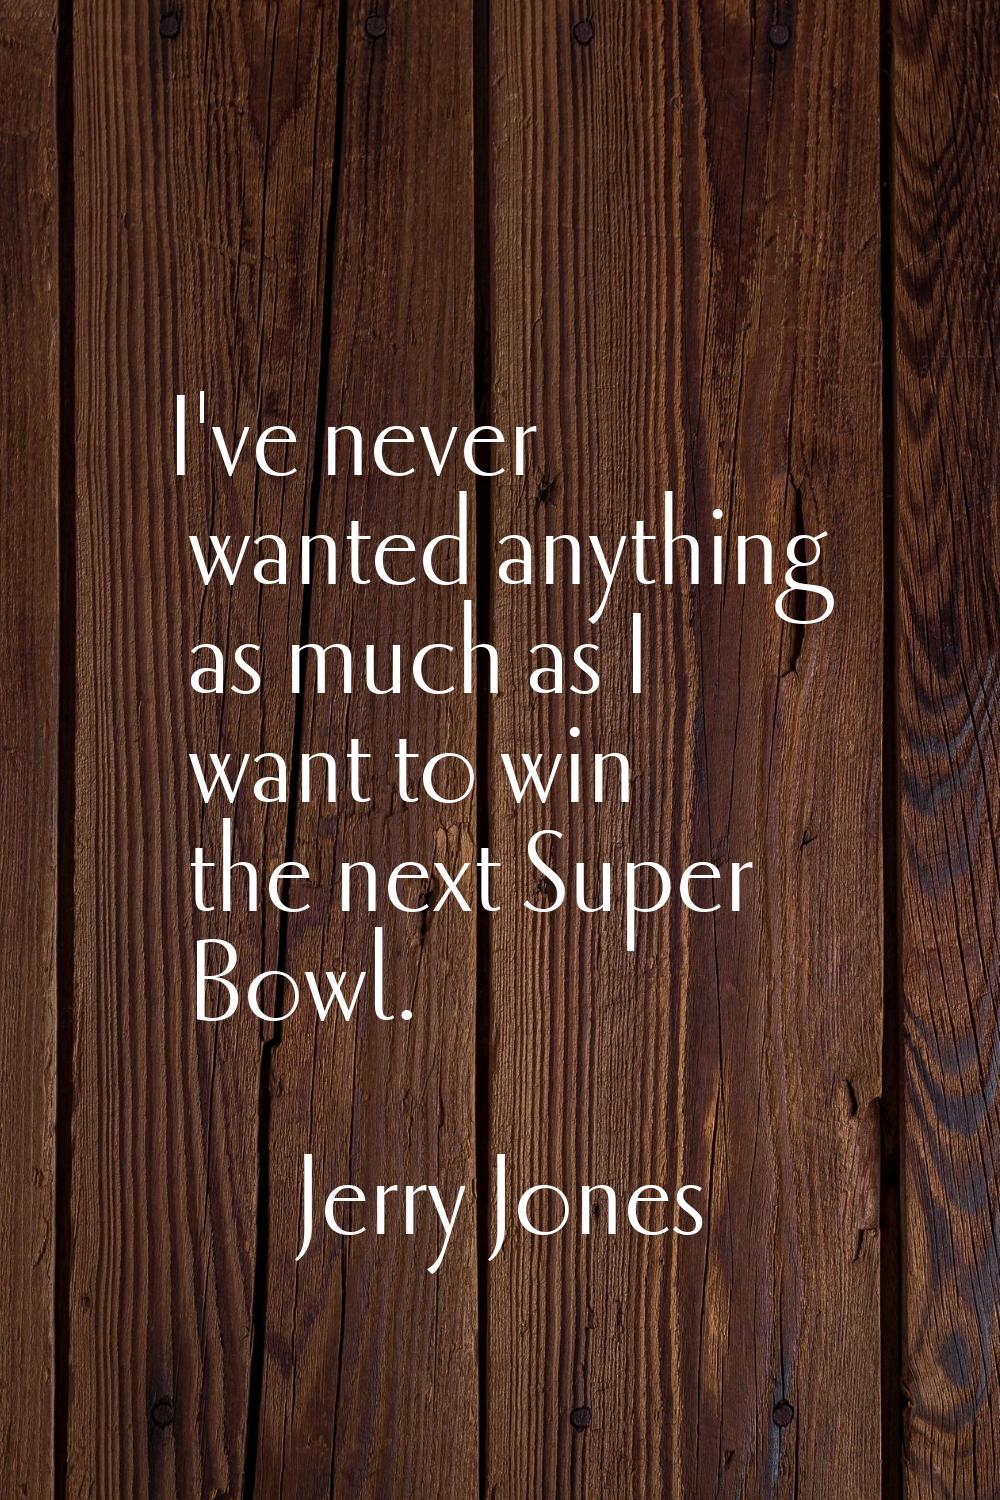 I've never wanted anything as much as I want to win the next Super Bowl.